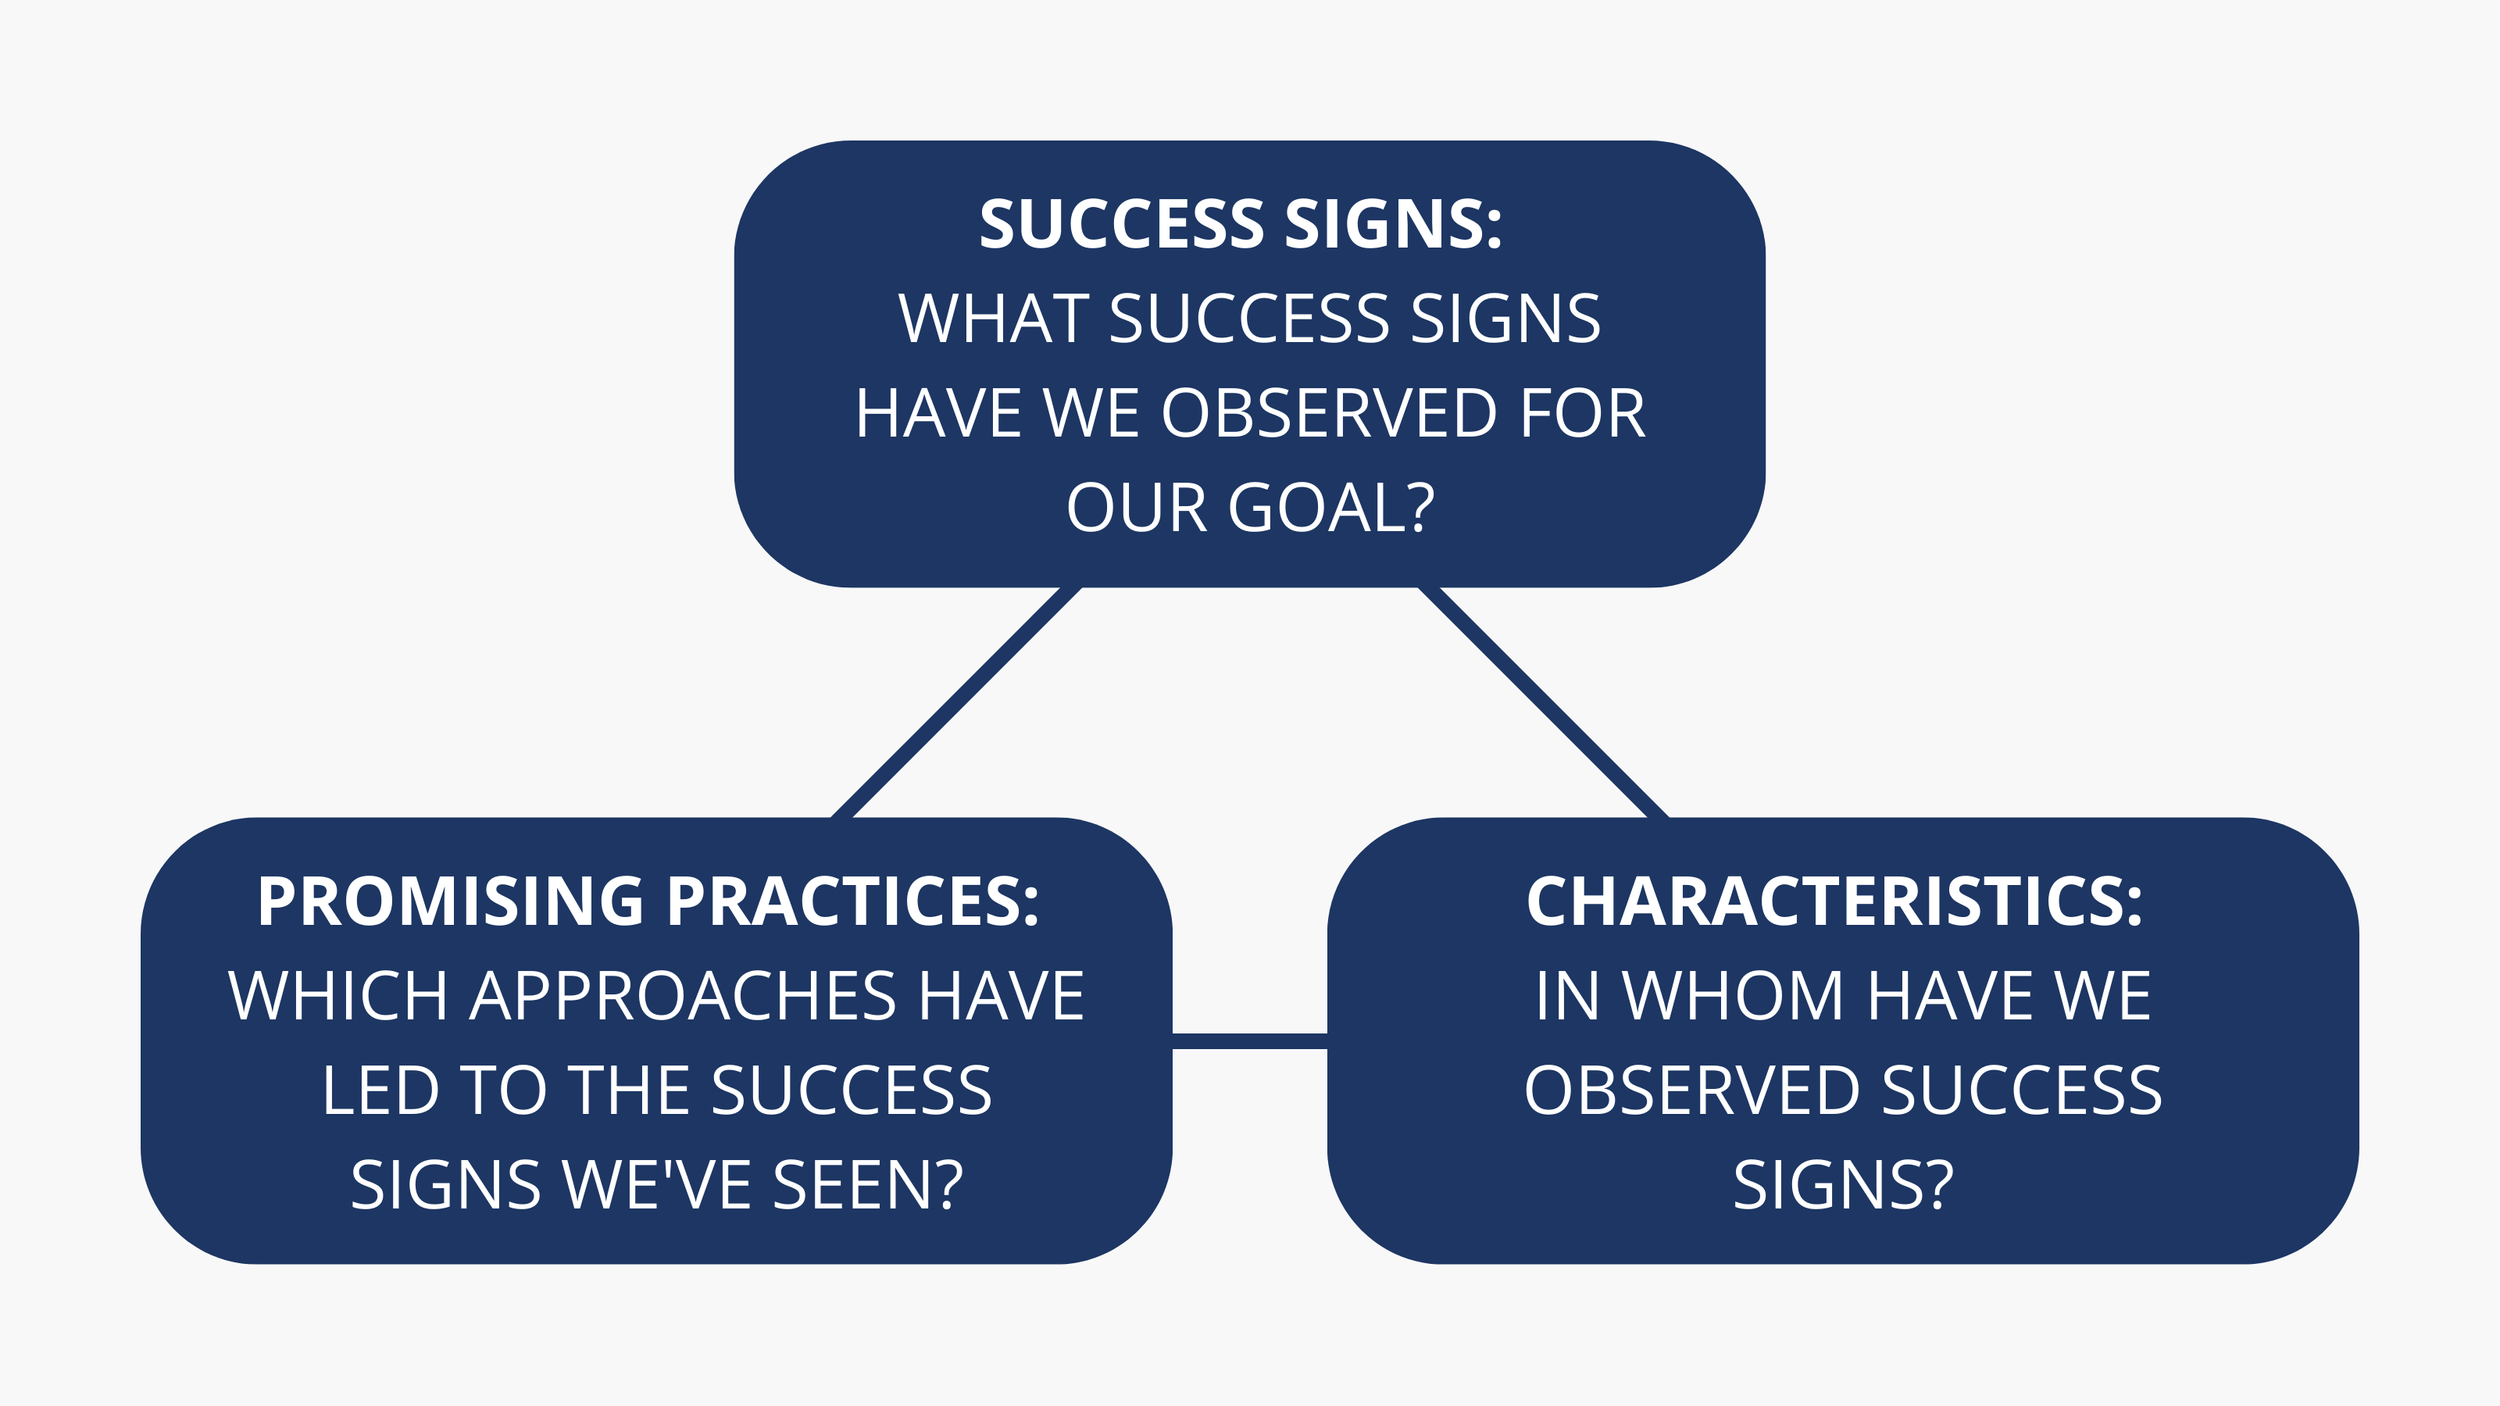 PROMISING PRACTICES WHICH APPROACHES HAVE LED TO THE SUCCESS SIGNS WE'VE SEEN.png